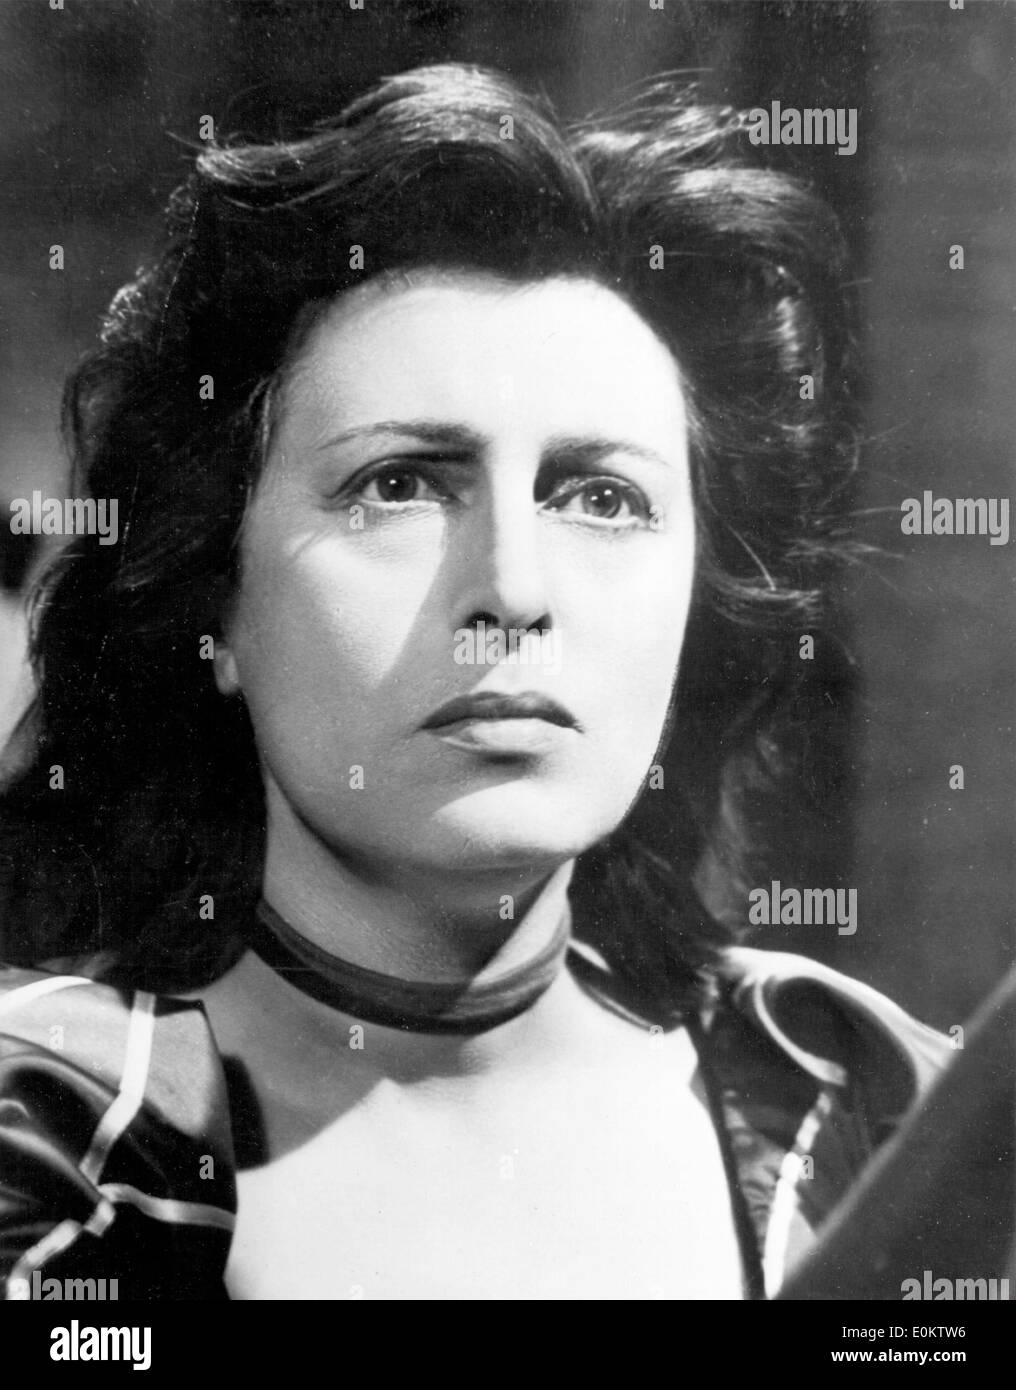 Actress Anna Magnani in a scene from a film Stock Photo